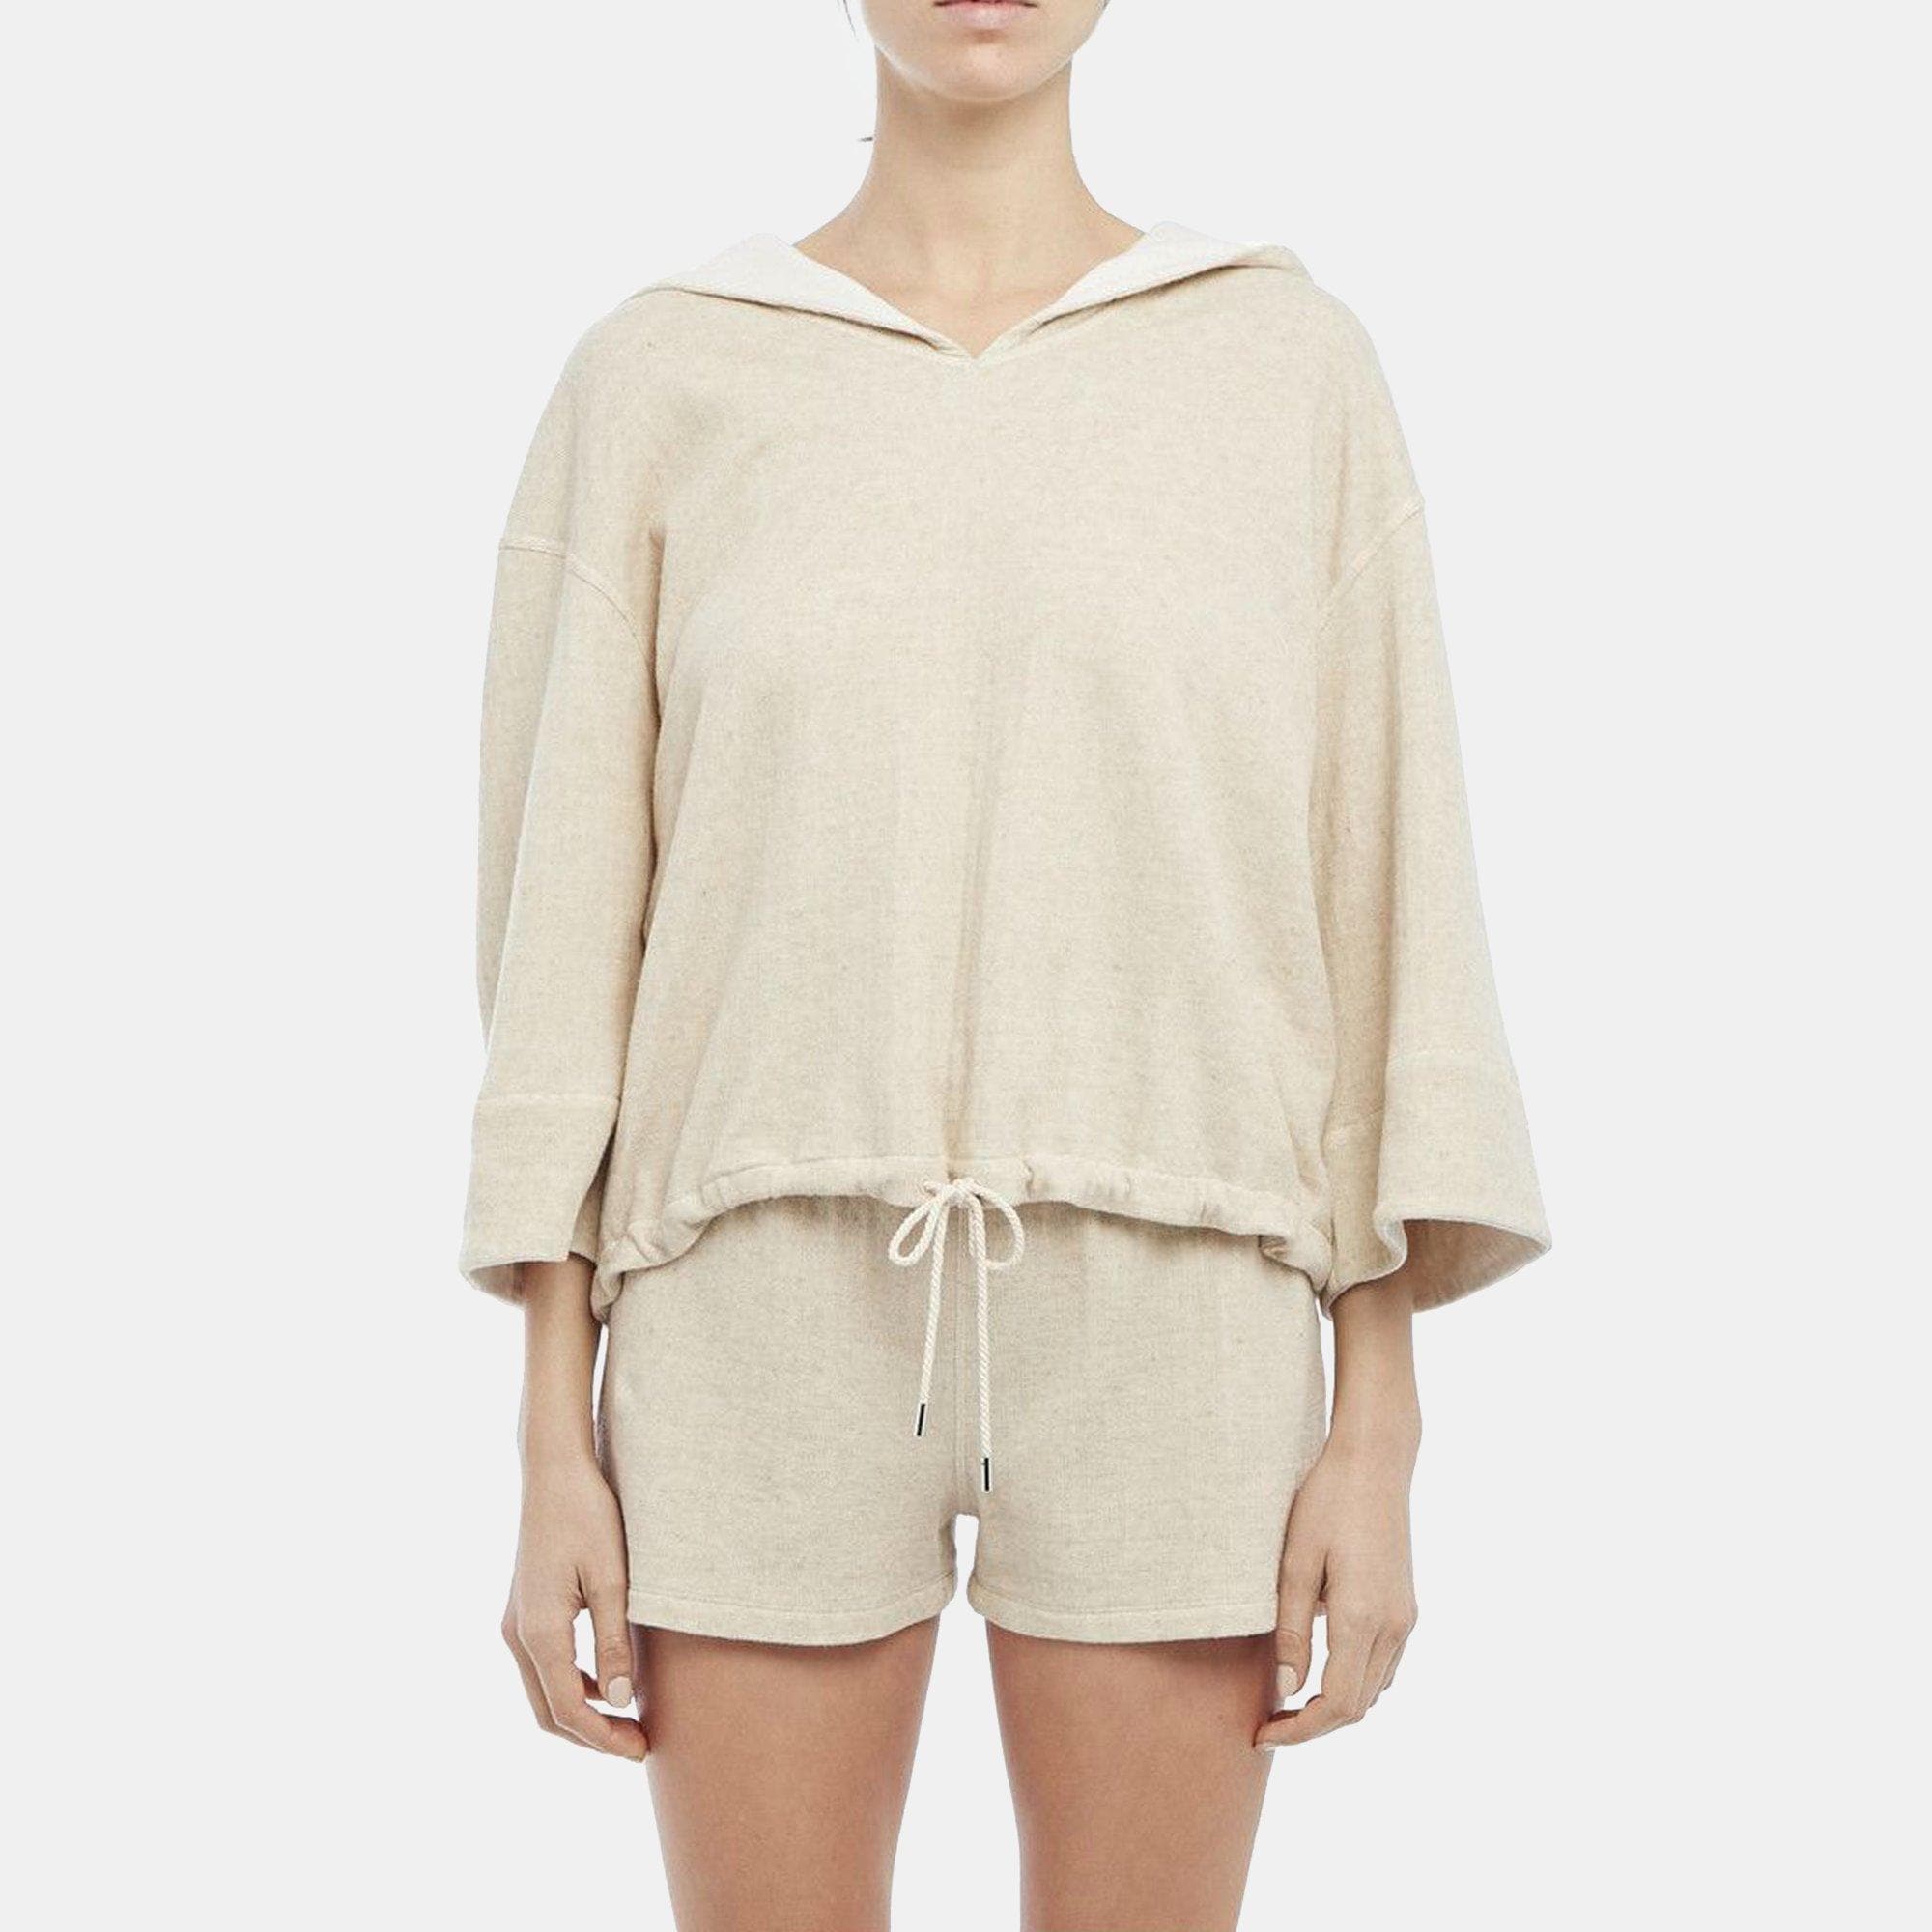 Theory Hooded Short-Sleeve Tee in Cotton-Linen Knit